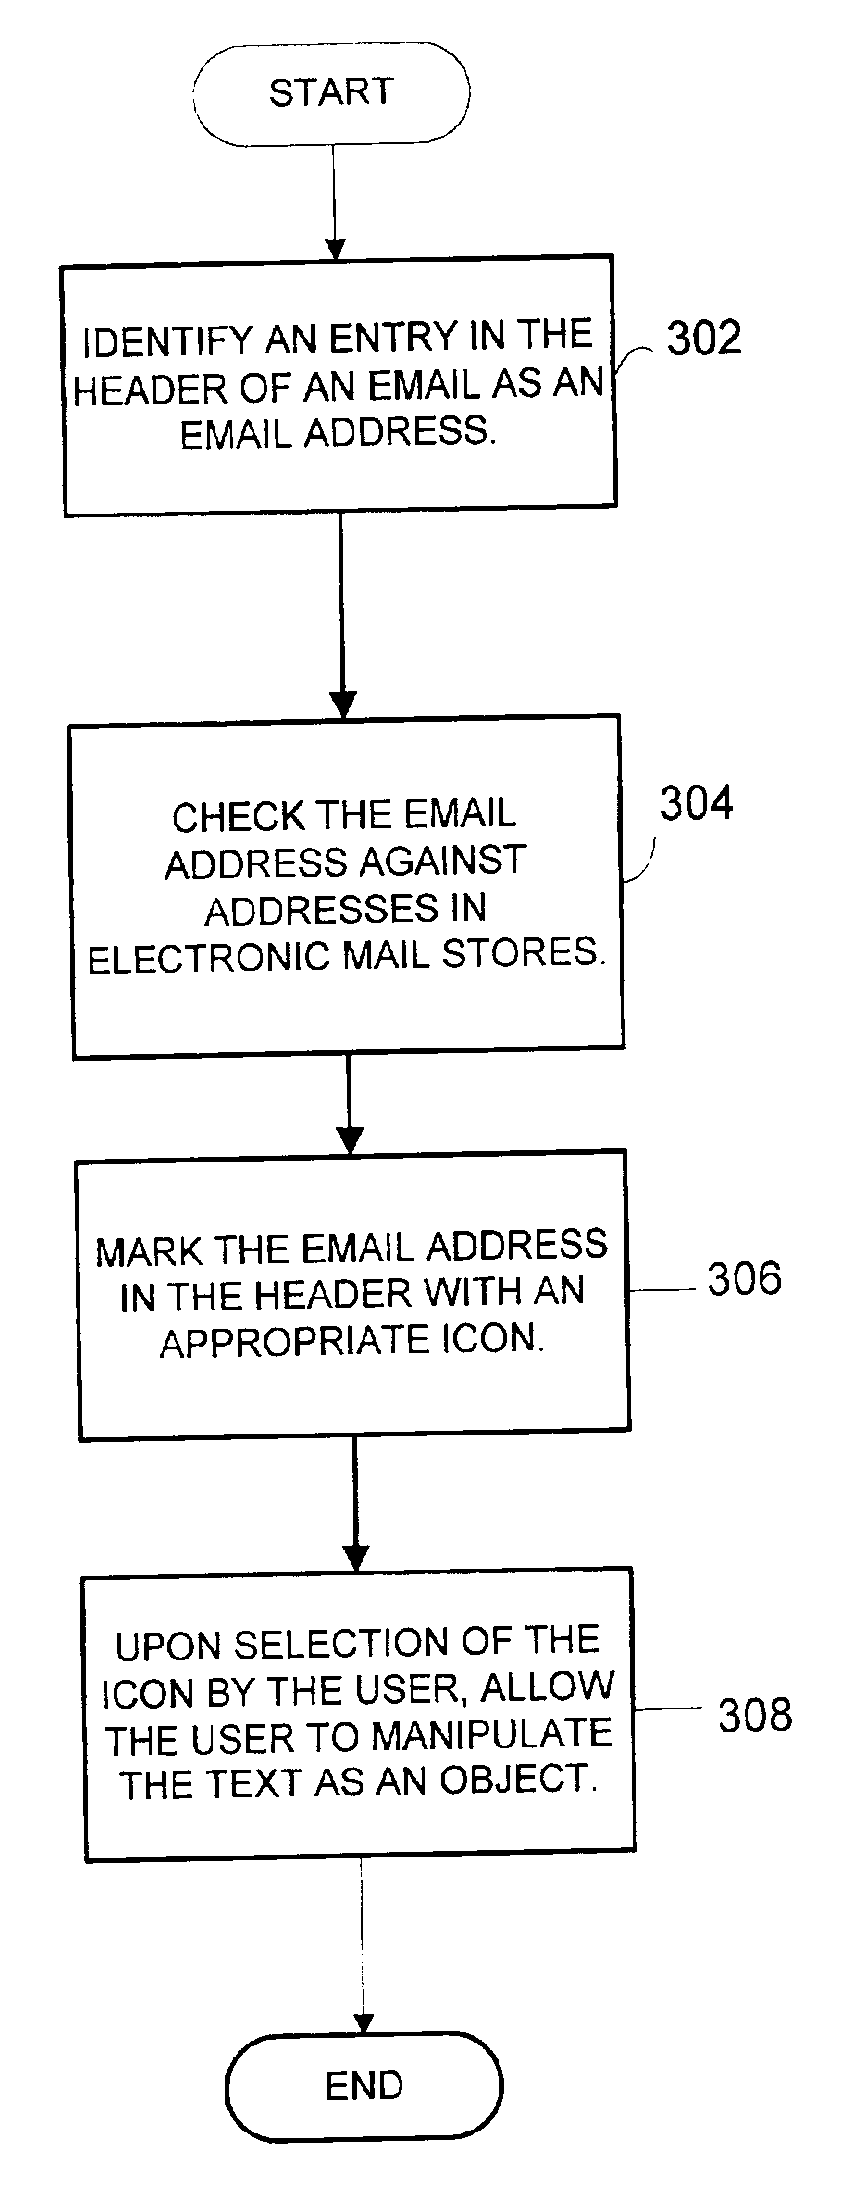 Addresses as objects for email messages